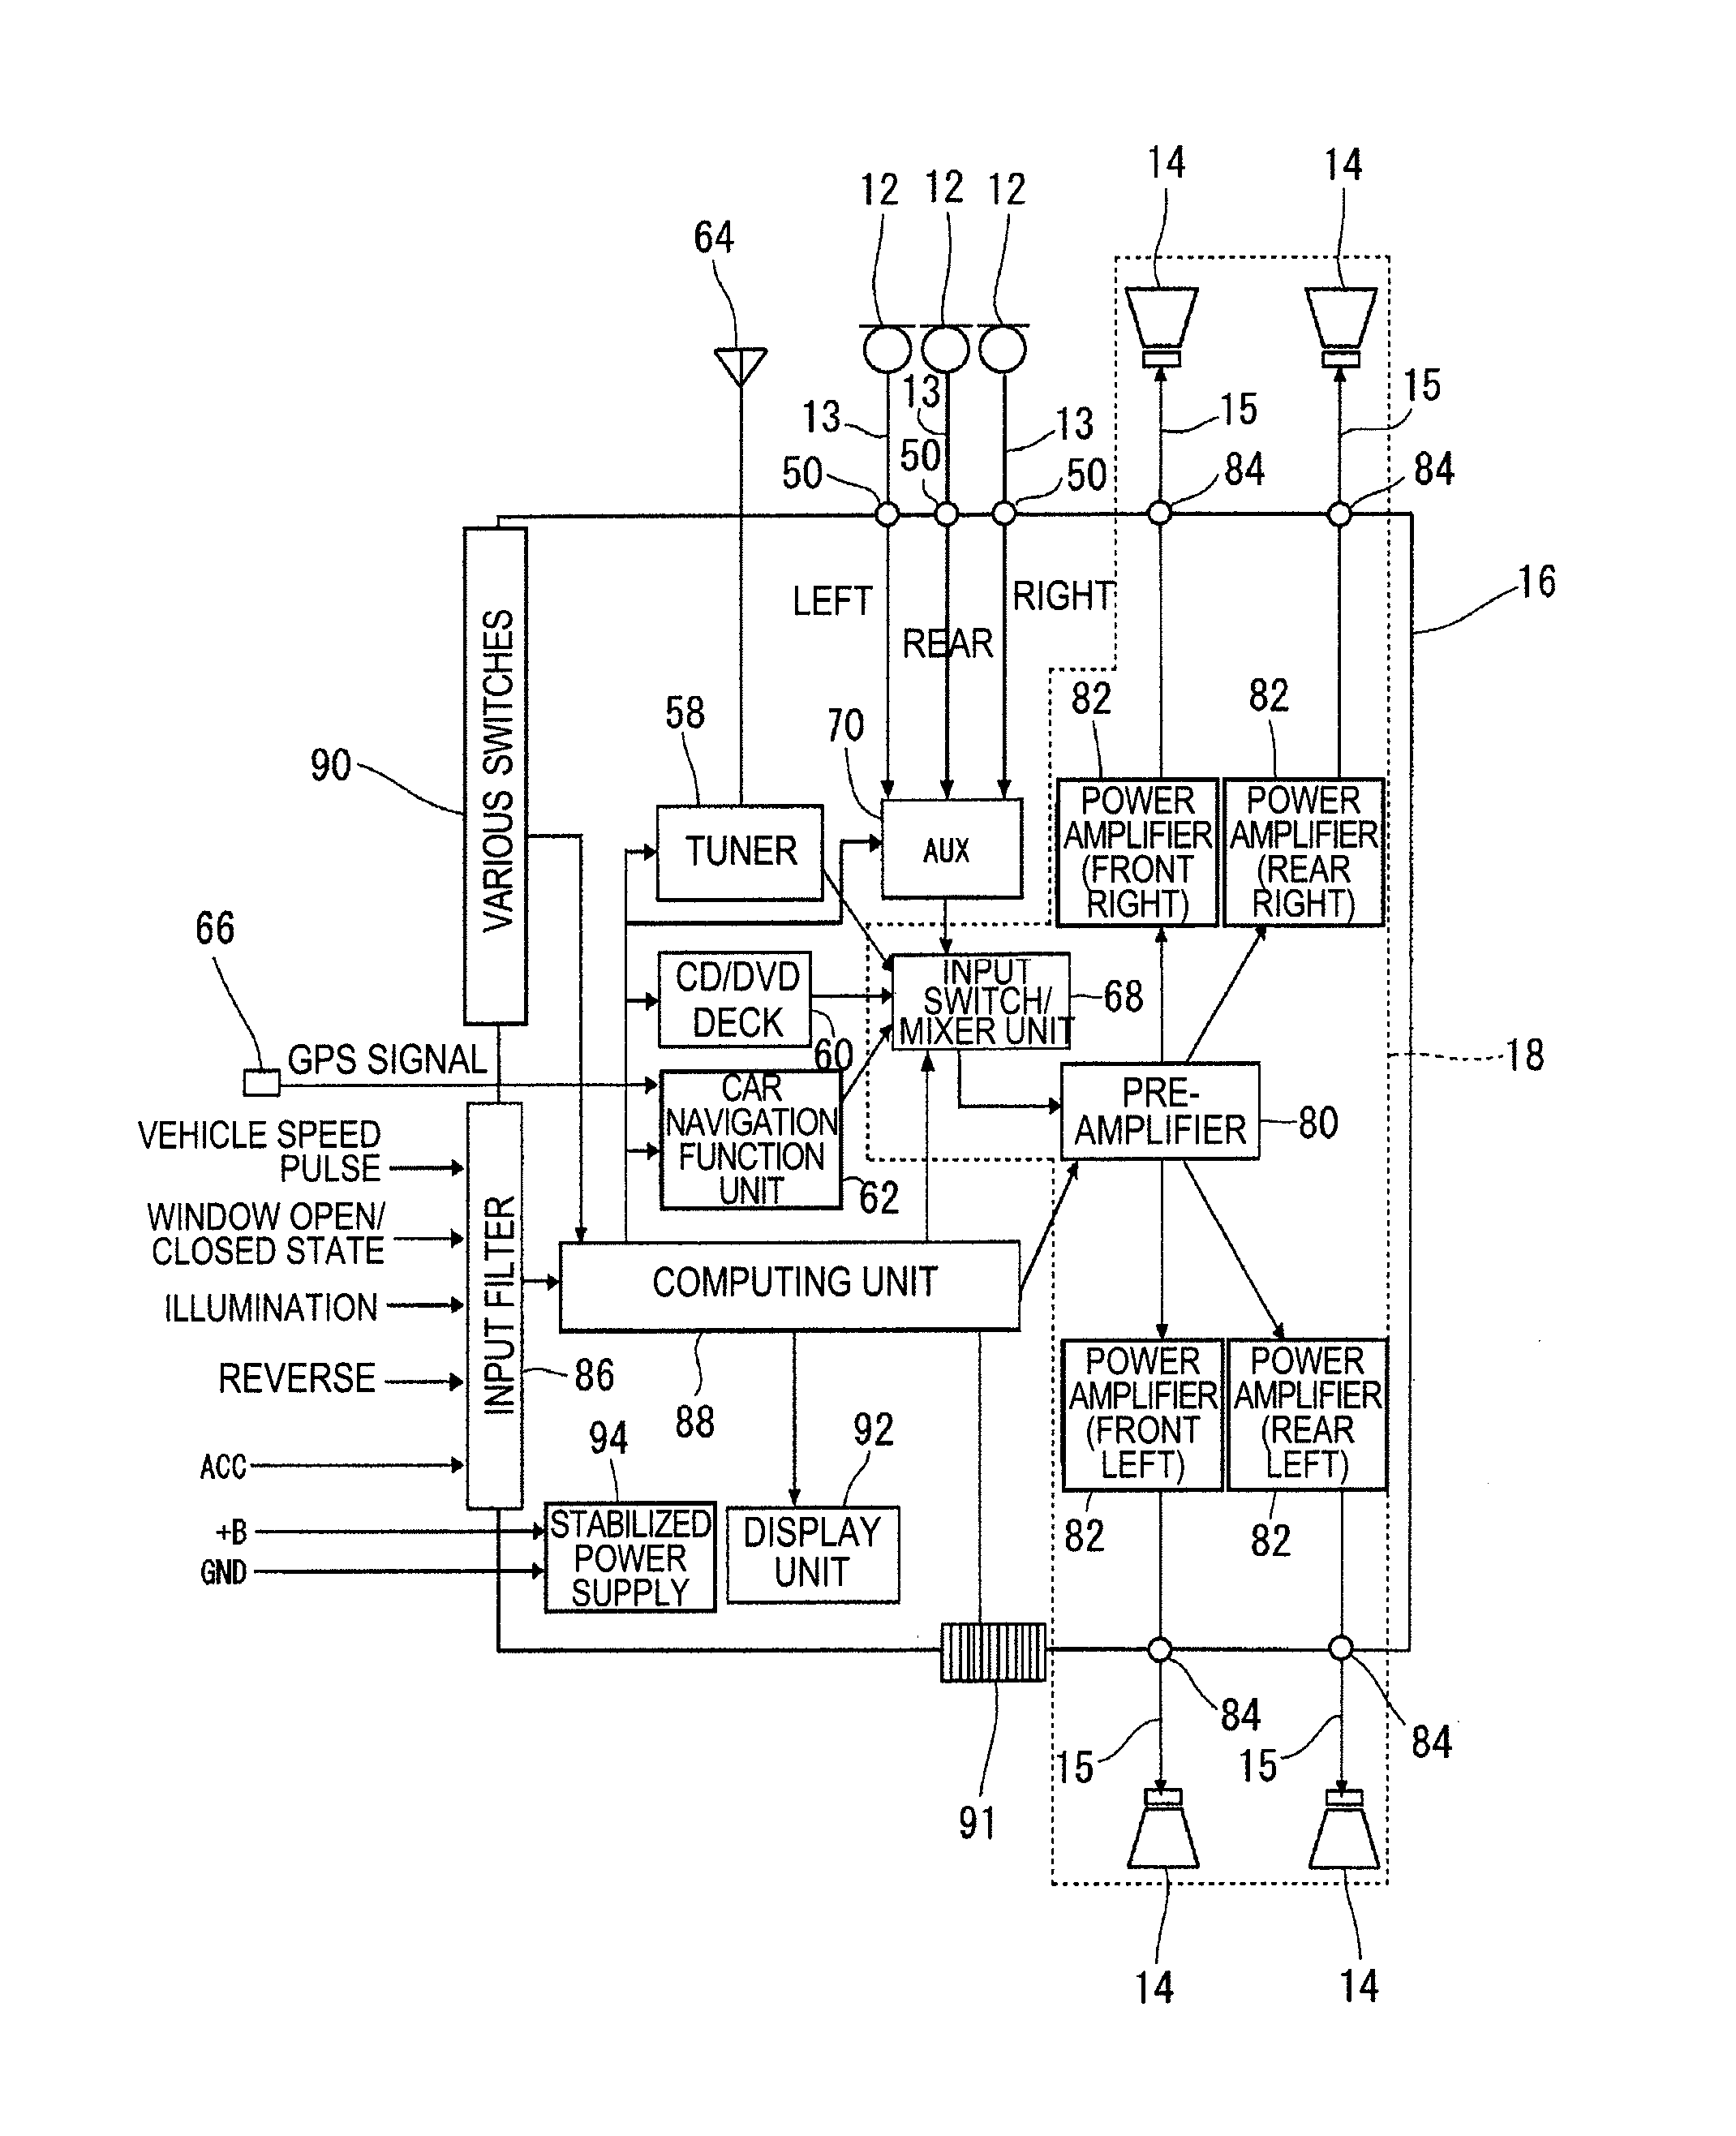 System for introducing sound outside vehicle